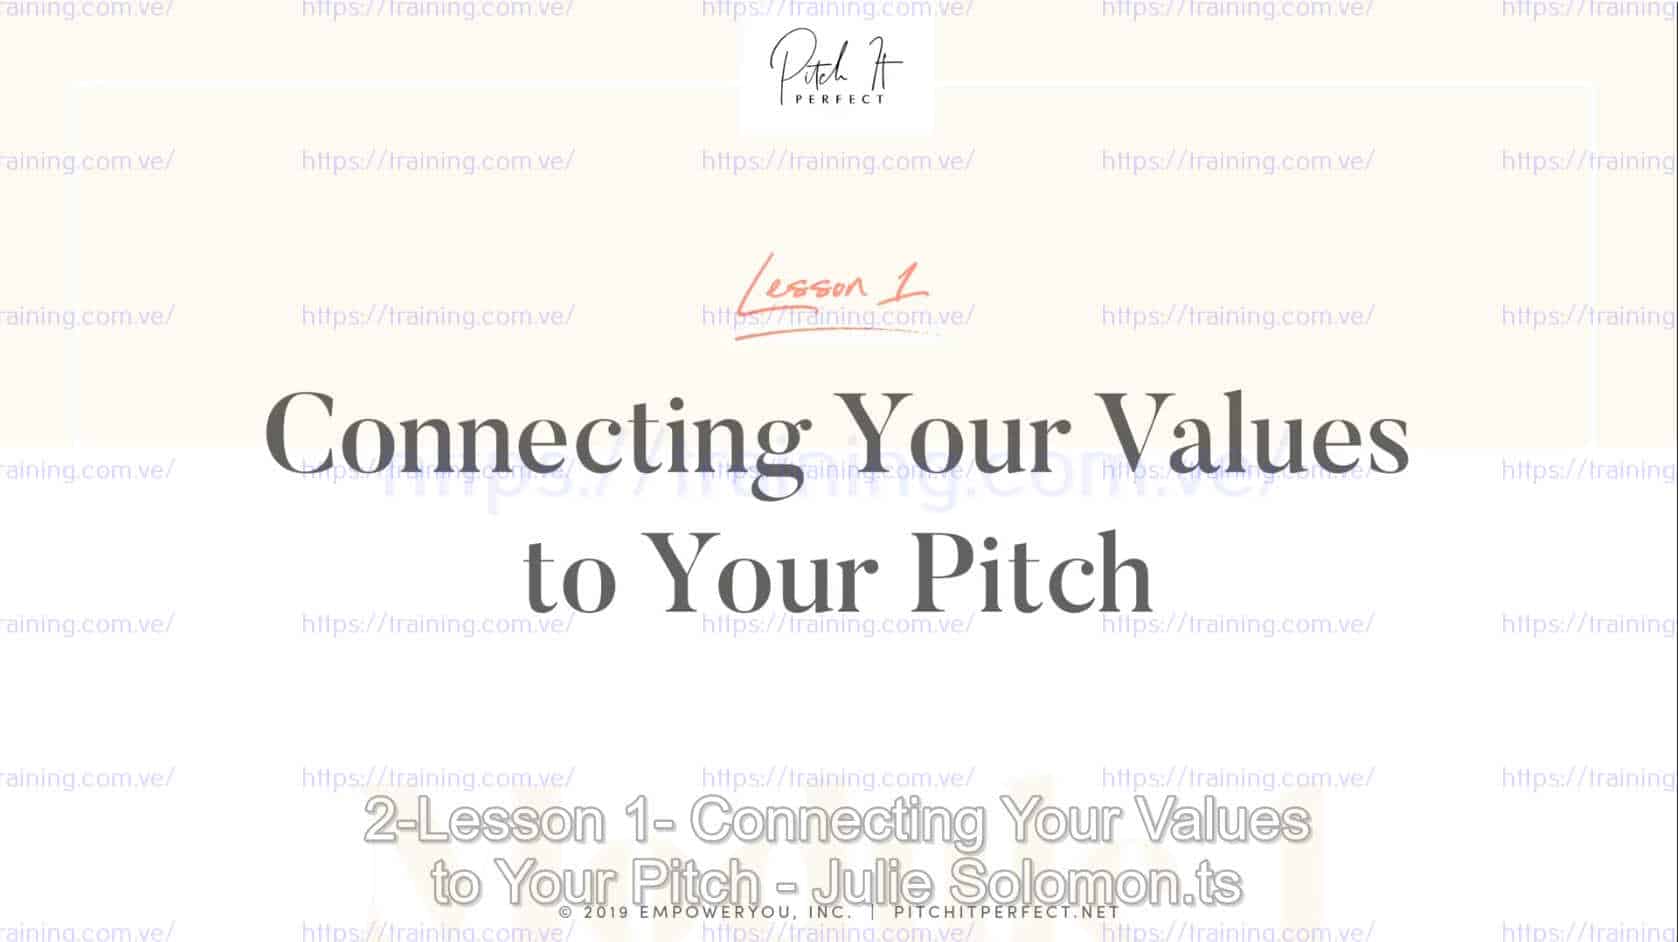 Pitch It Perfect by Julie Solomon Coupon